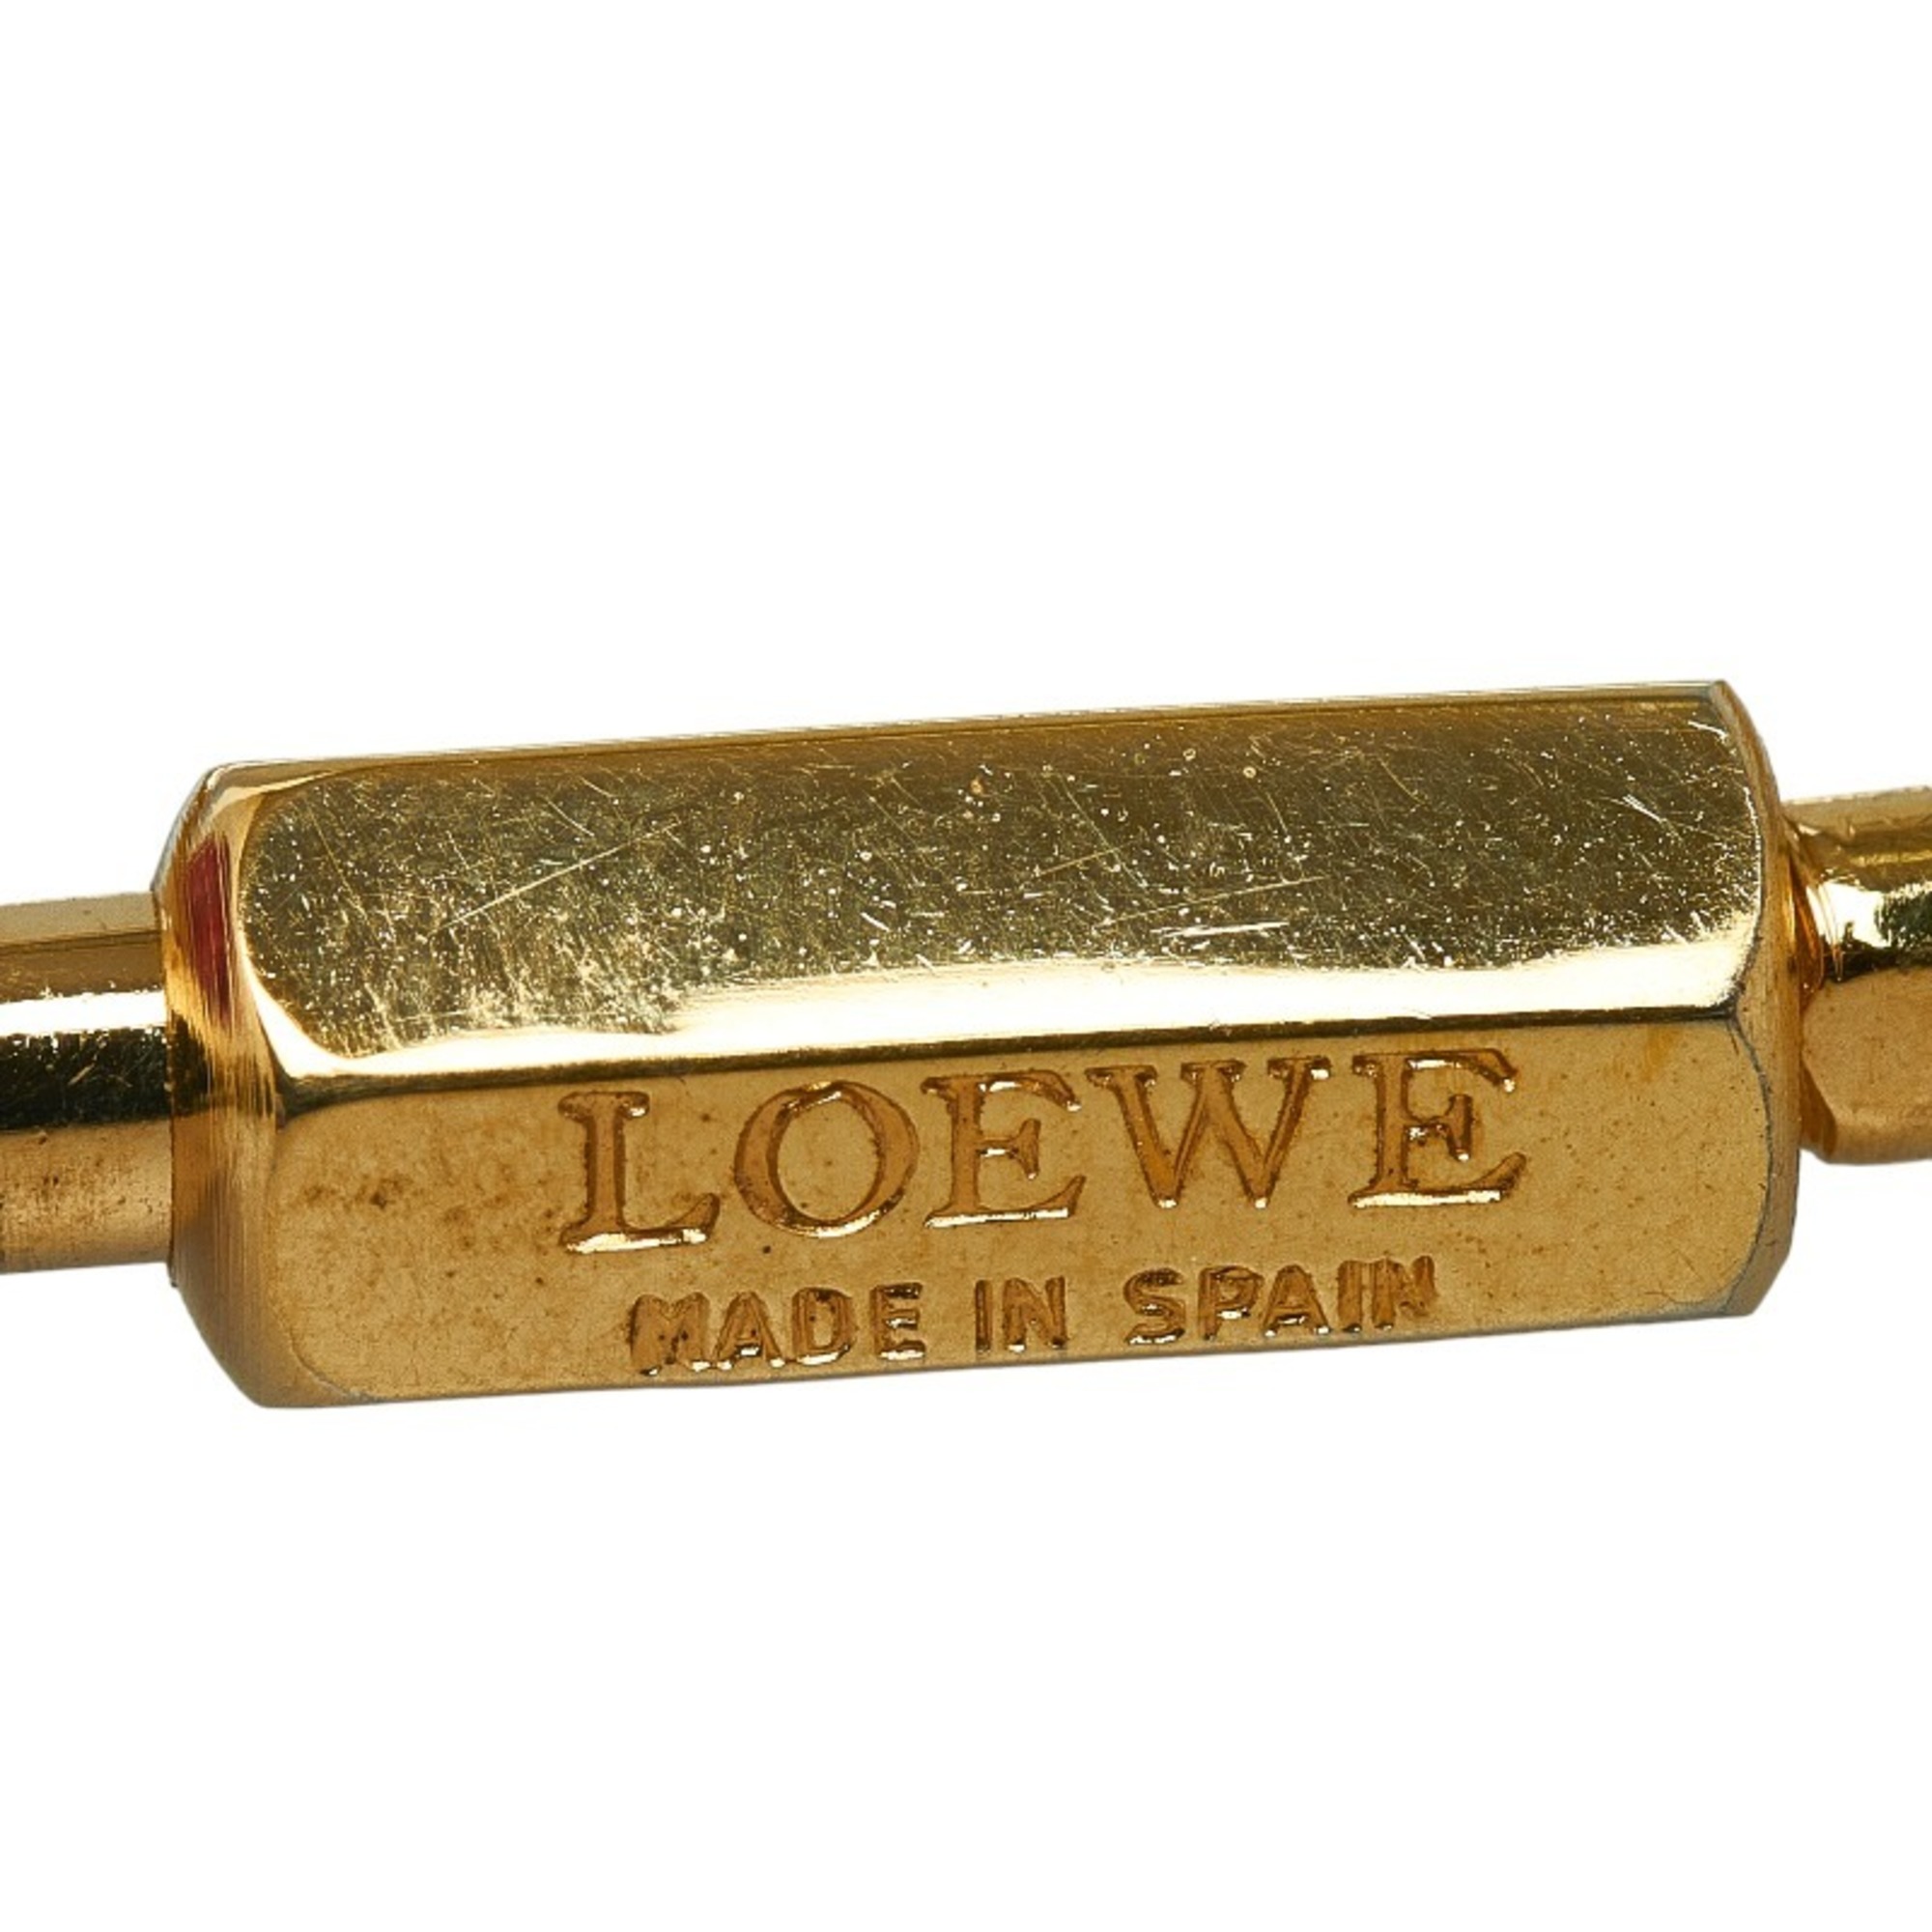 LOEWE Bag Charm Key Ring Red Gold Leather Plated Ladies